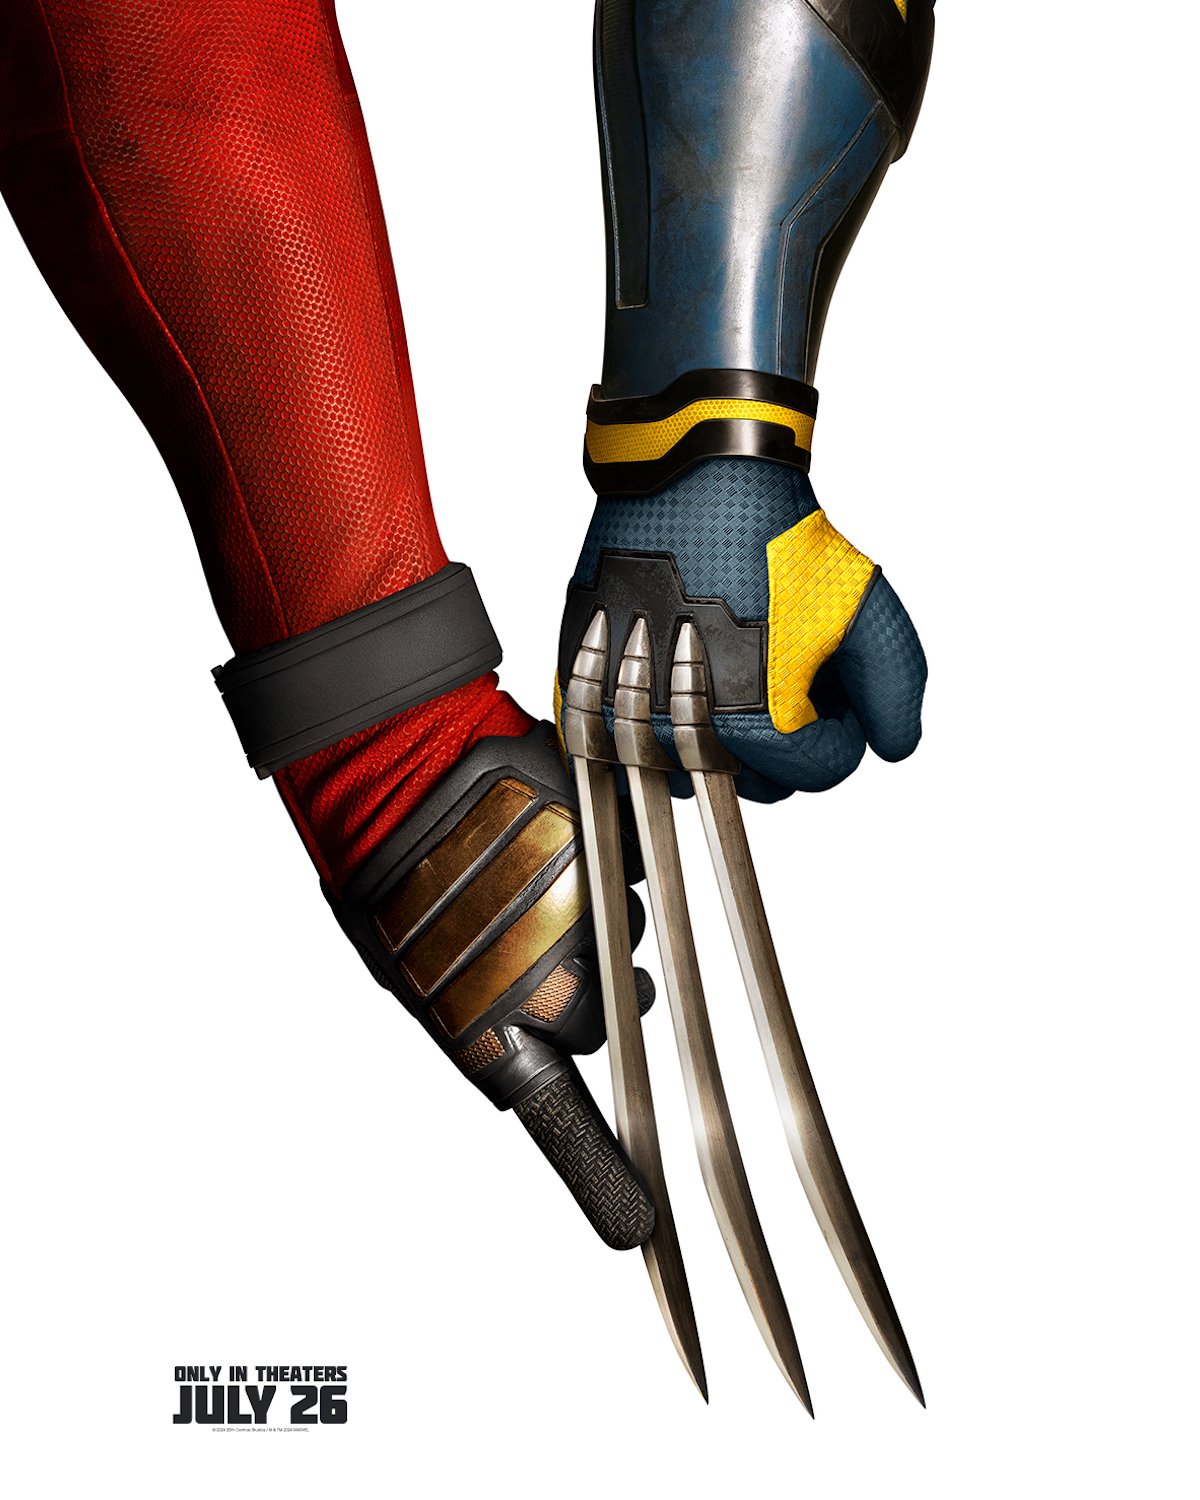 Deadpool's arm lightly touching one of Wolverine's claws in a Deadpool & Wolverine poster